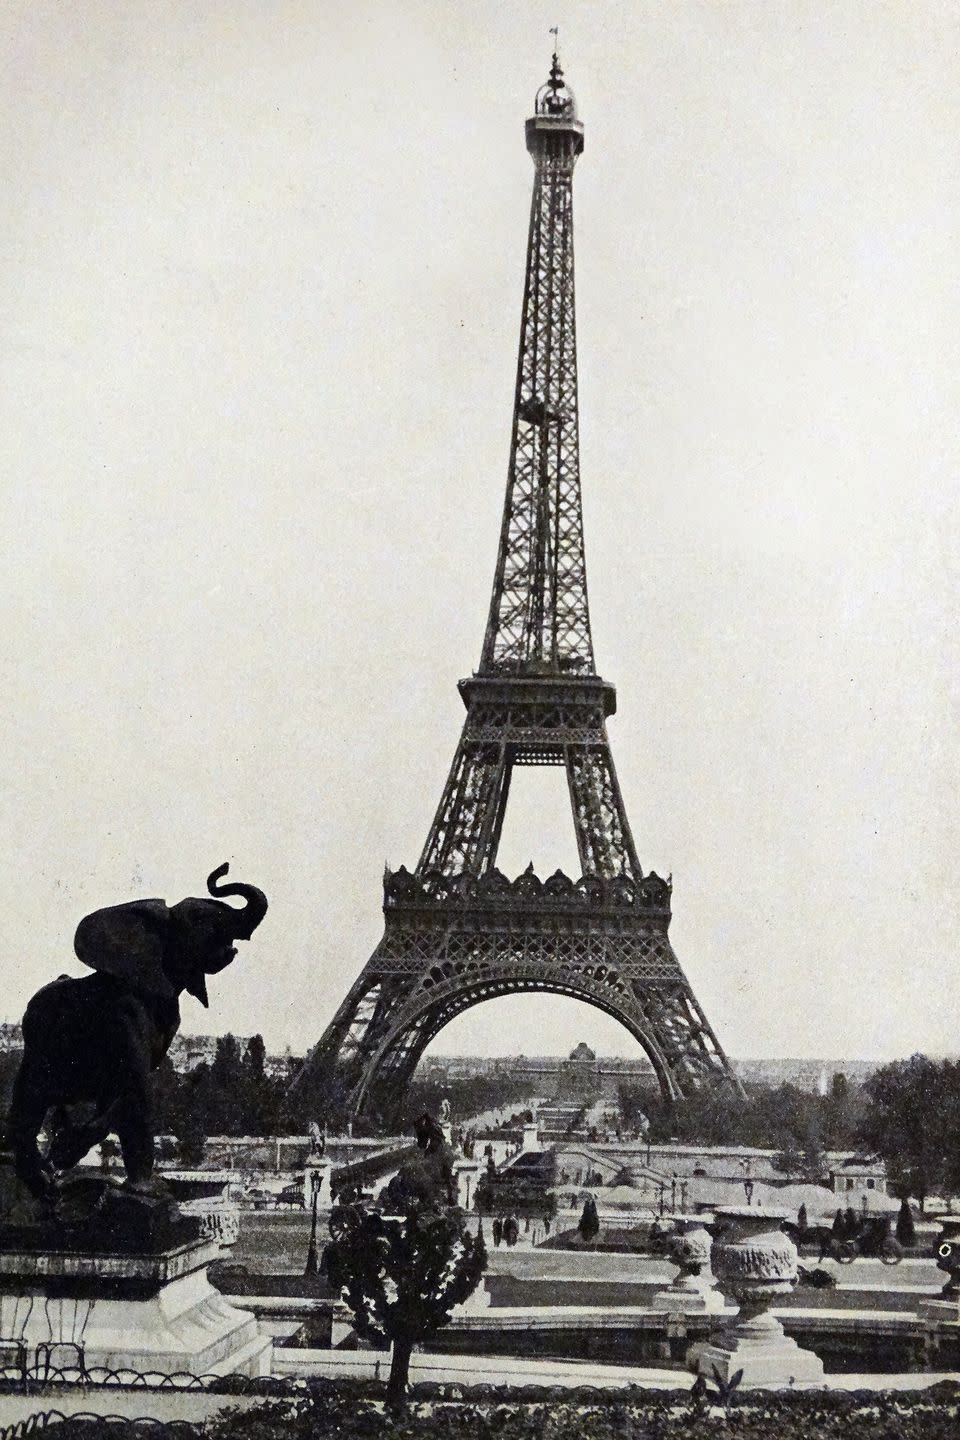 The Eiffel Tower was the tallest structure on Earth.